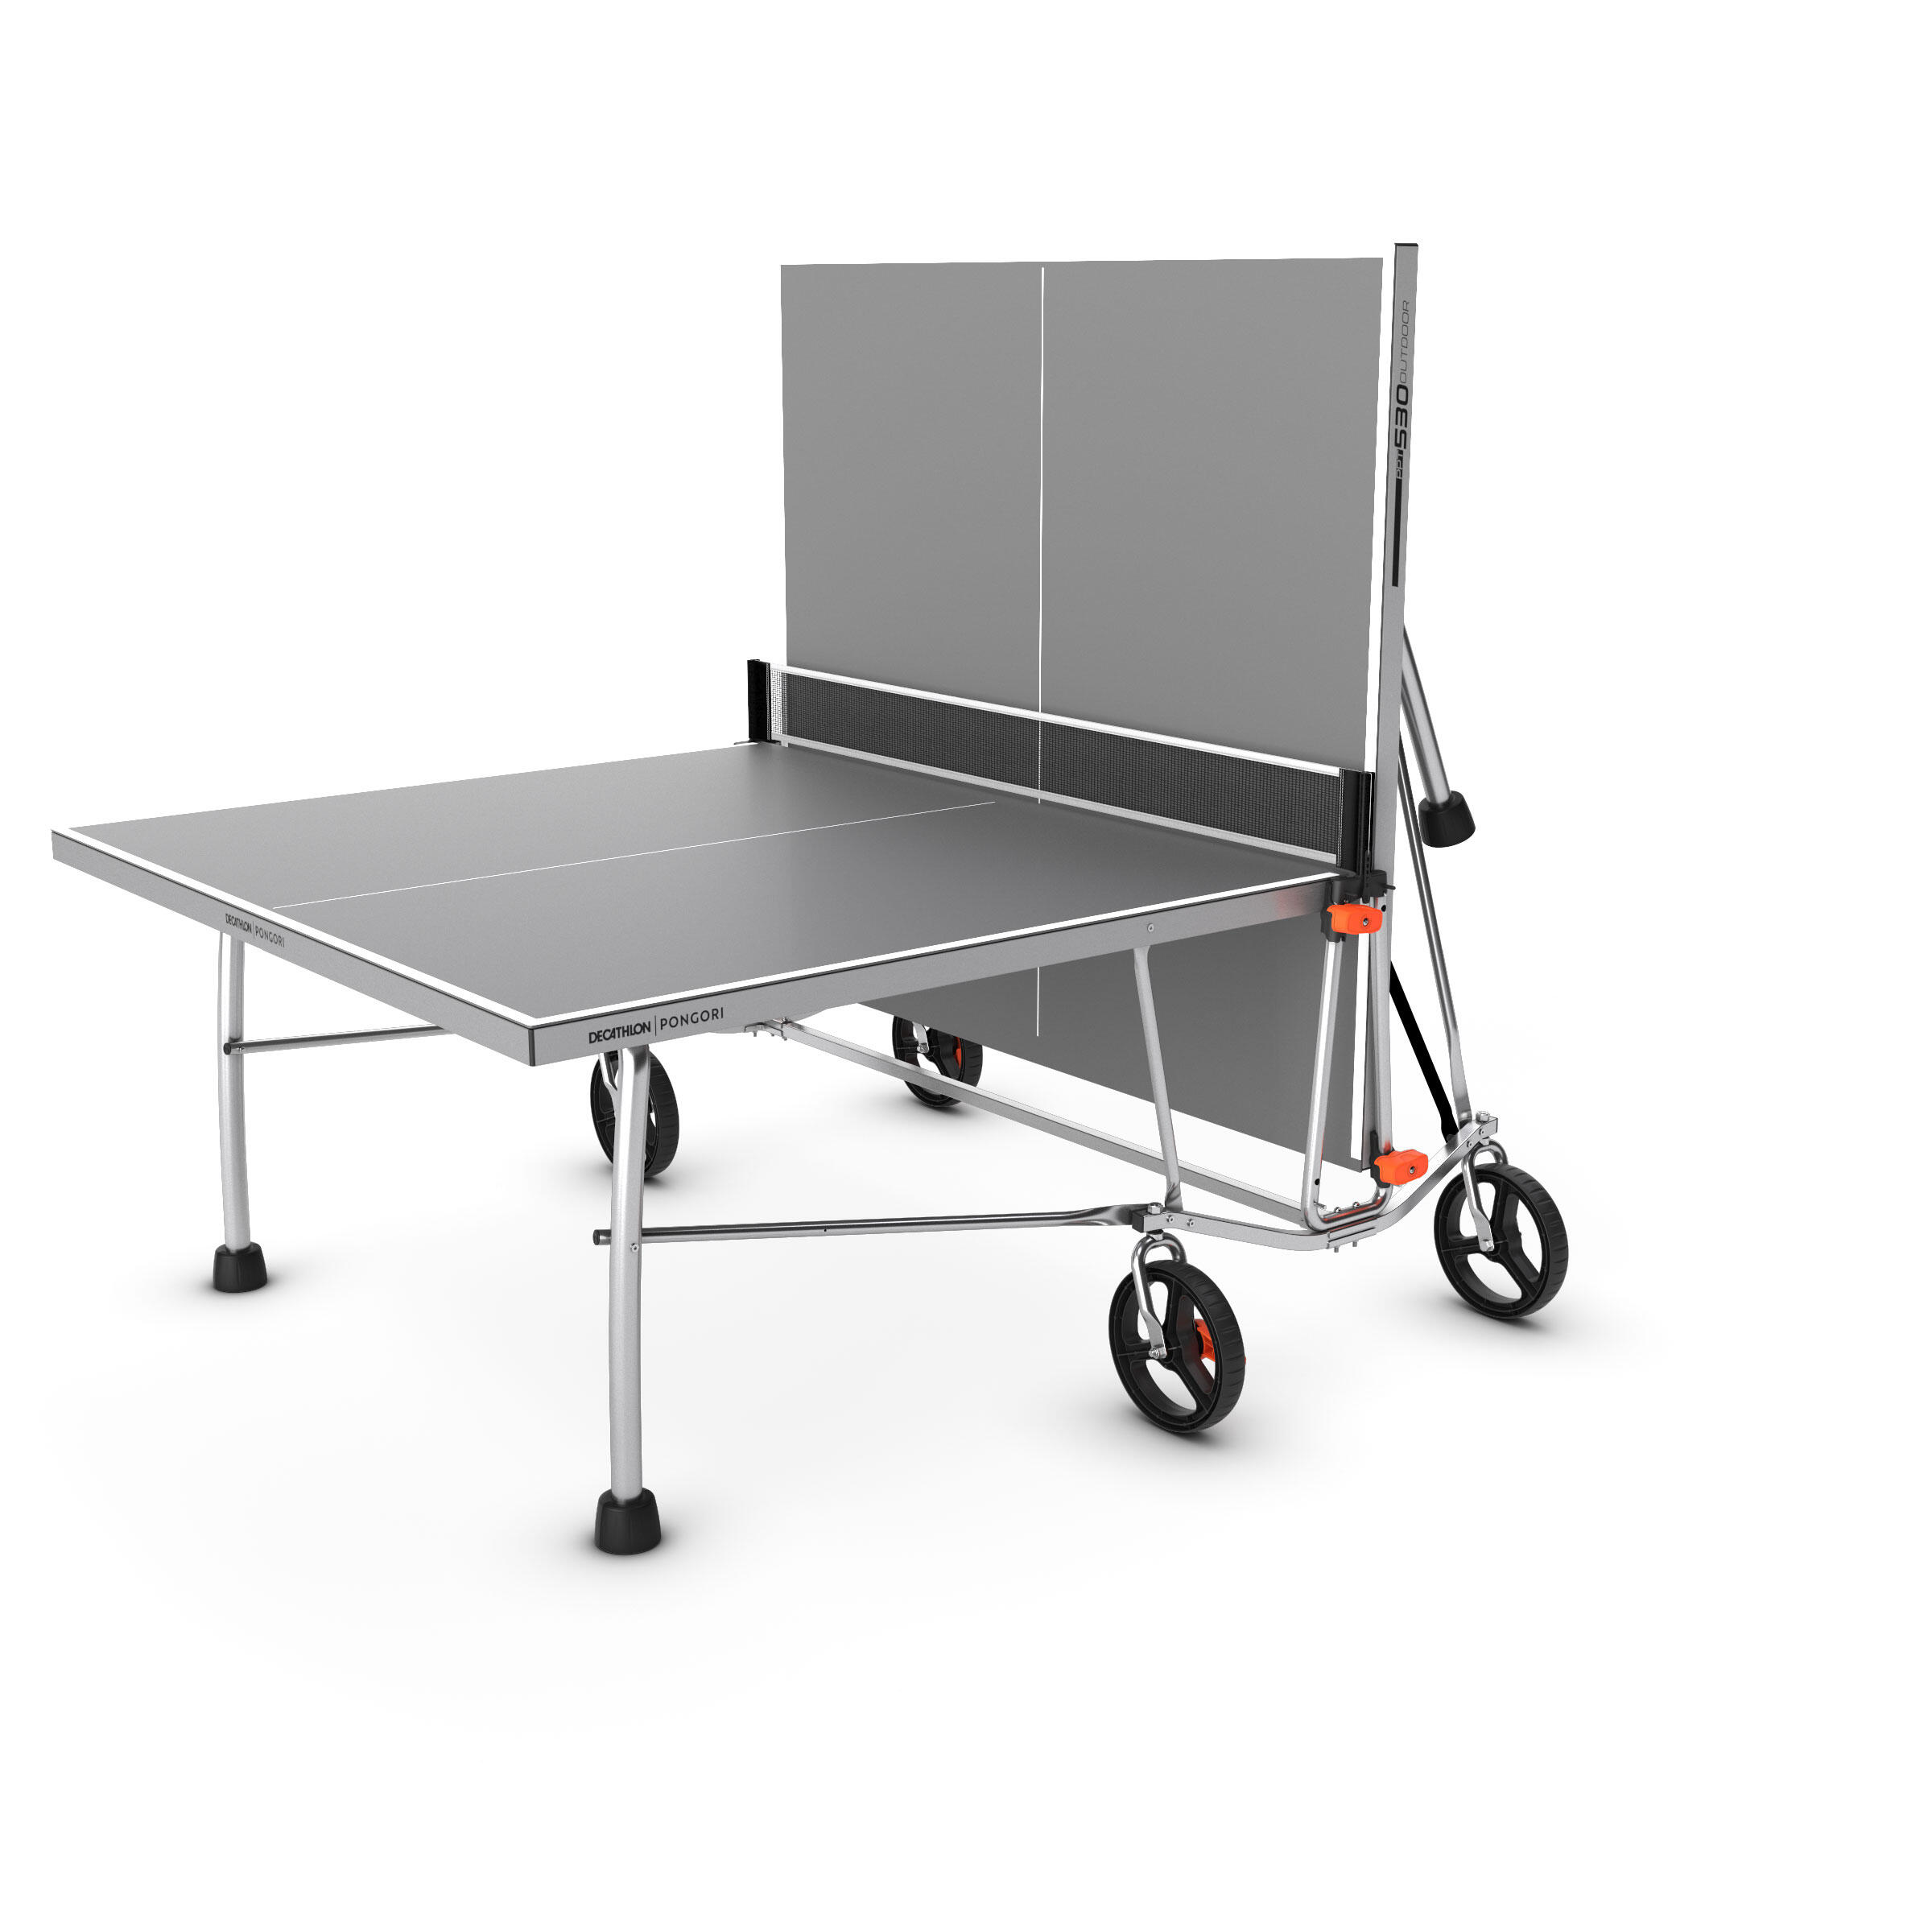 Outdoor Table Tennis Table PPT 530 - Grey 5/12